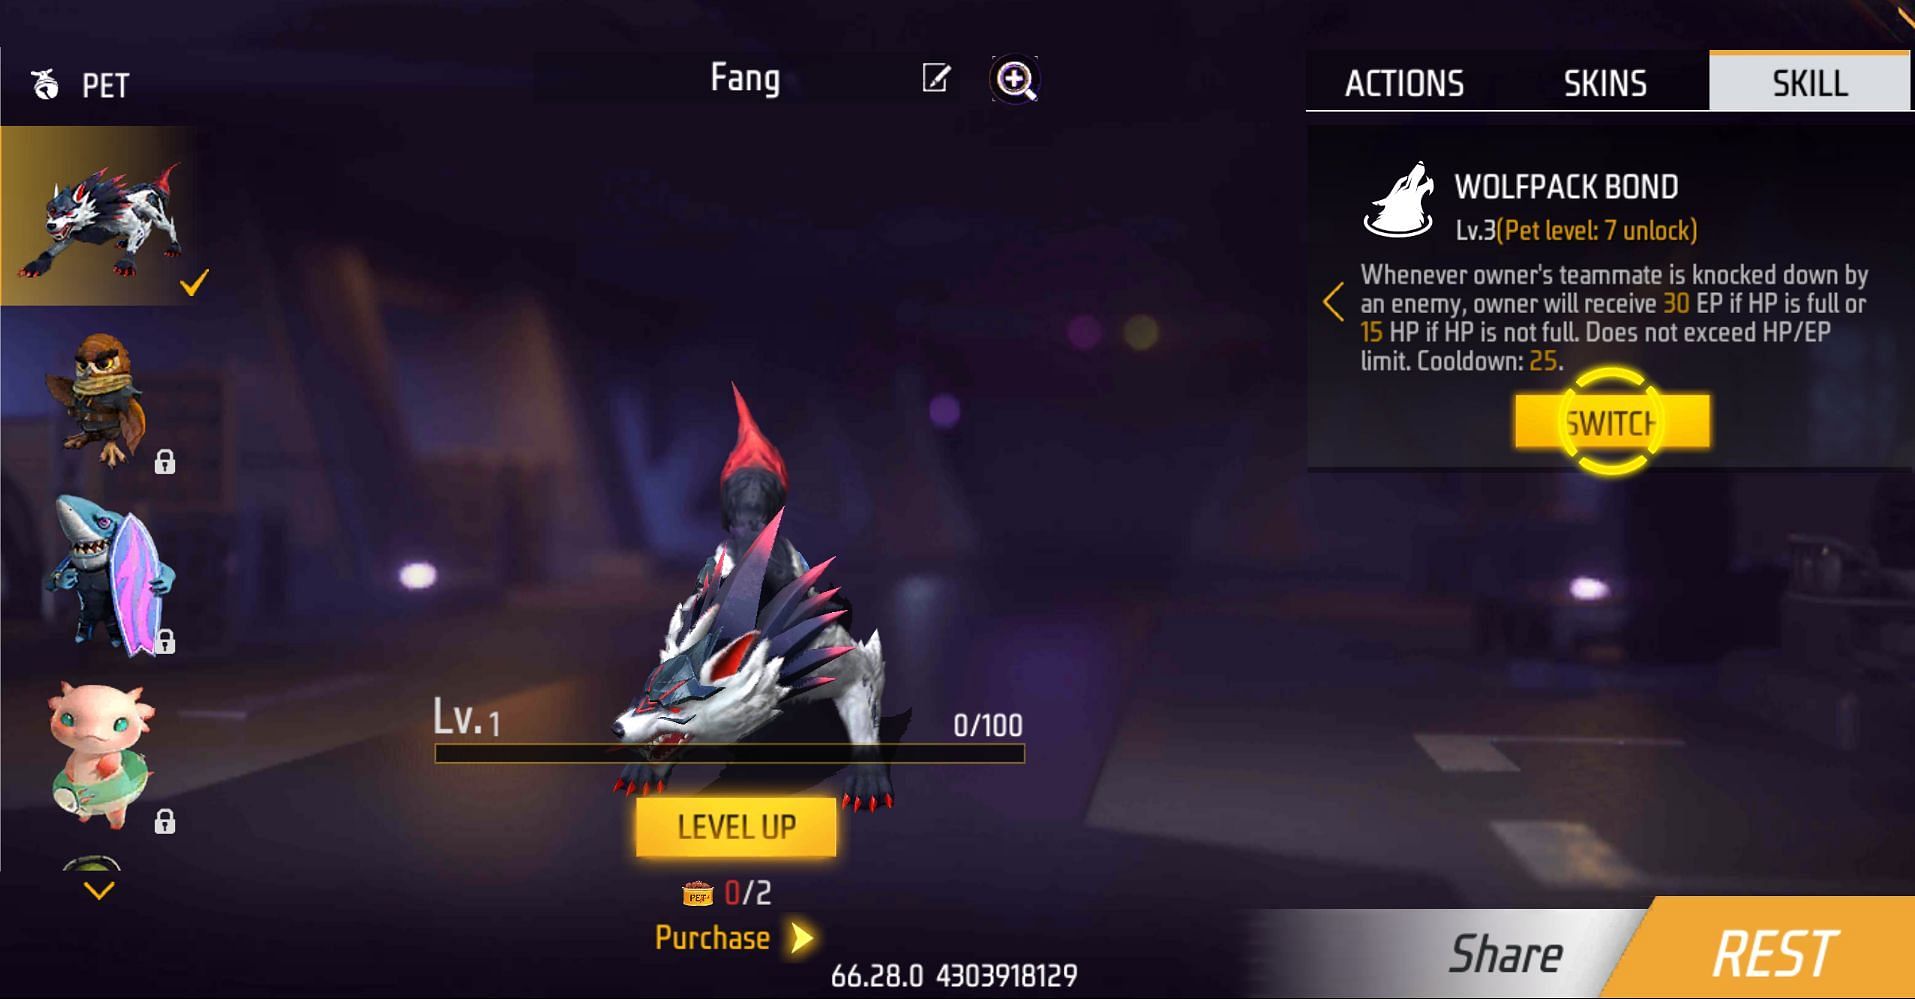 The new Fang pet in the Advance Server (Image via Garena)